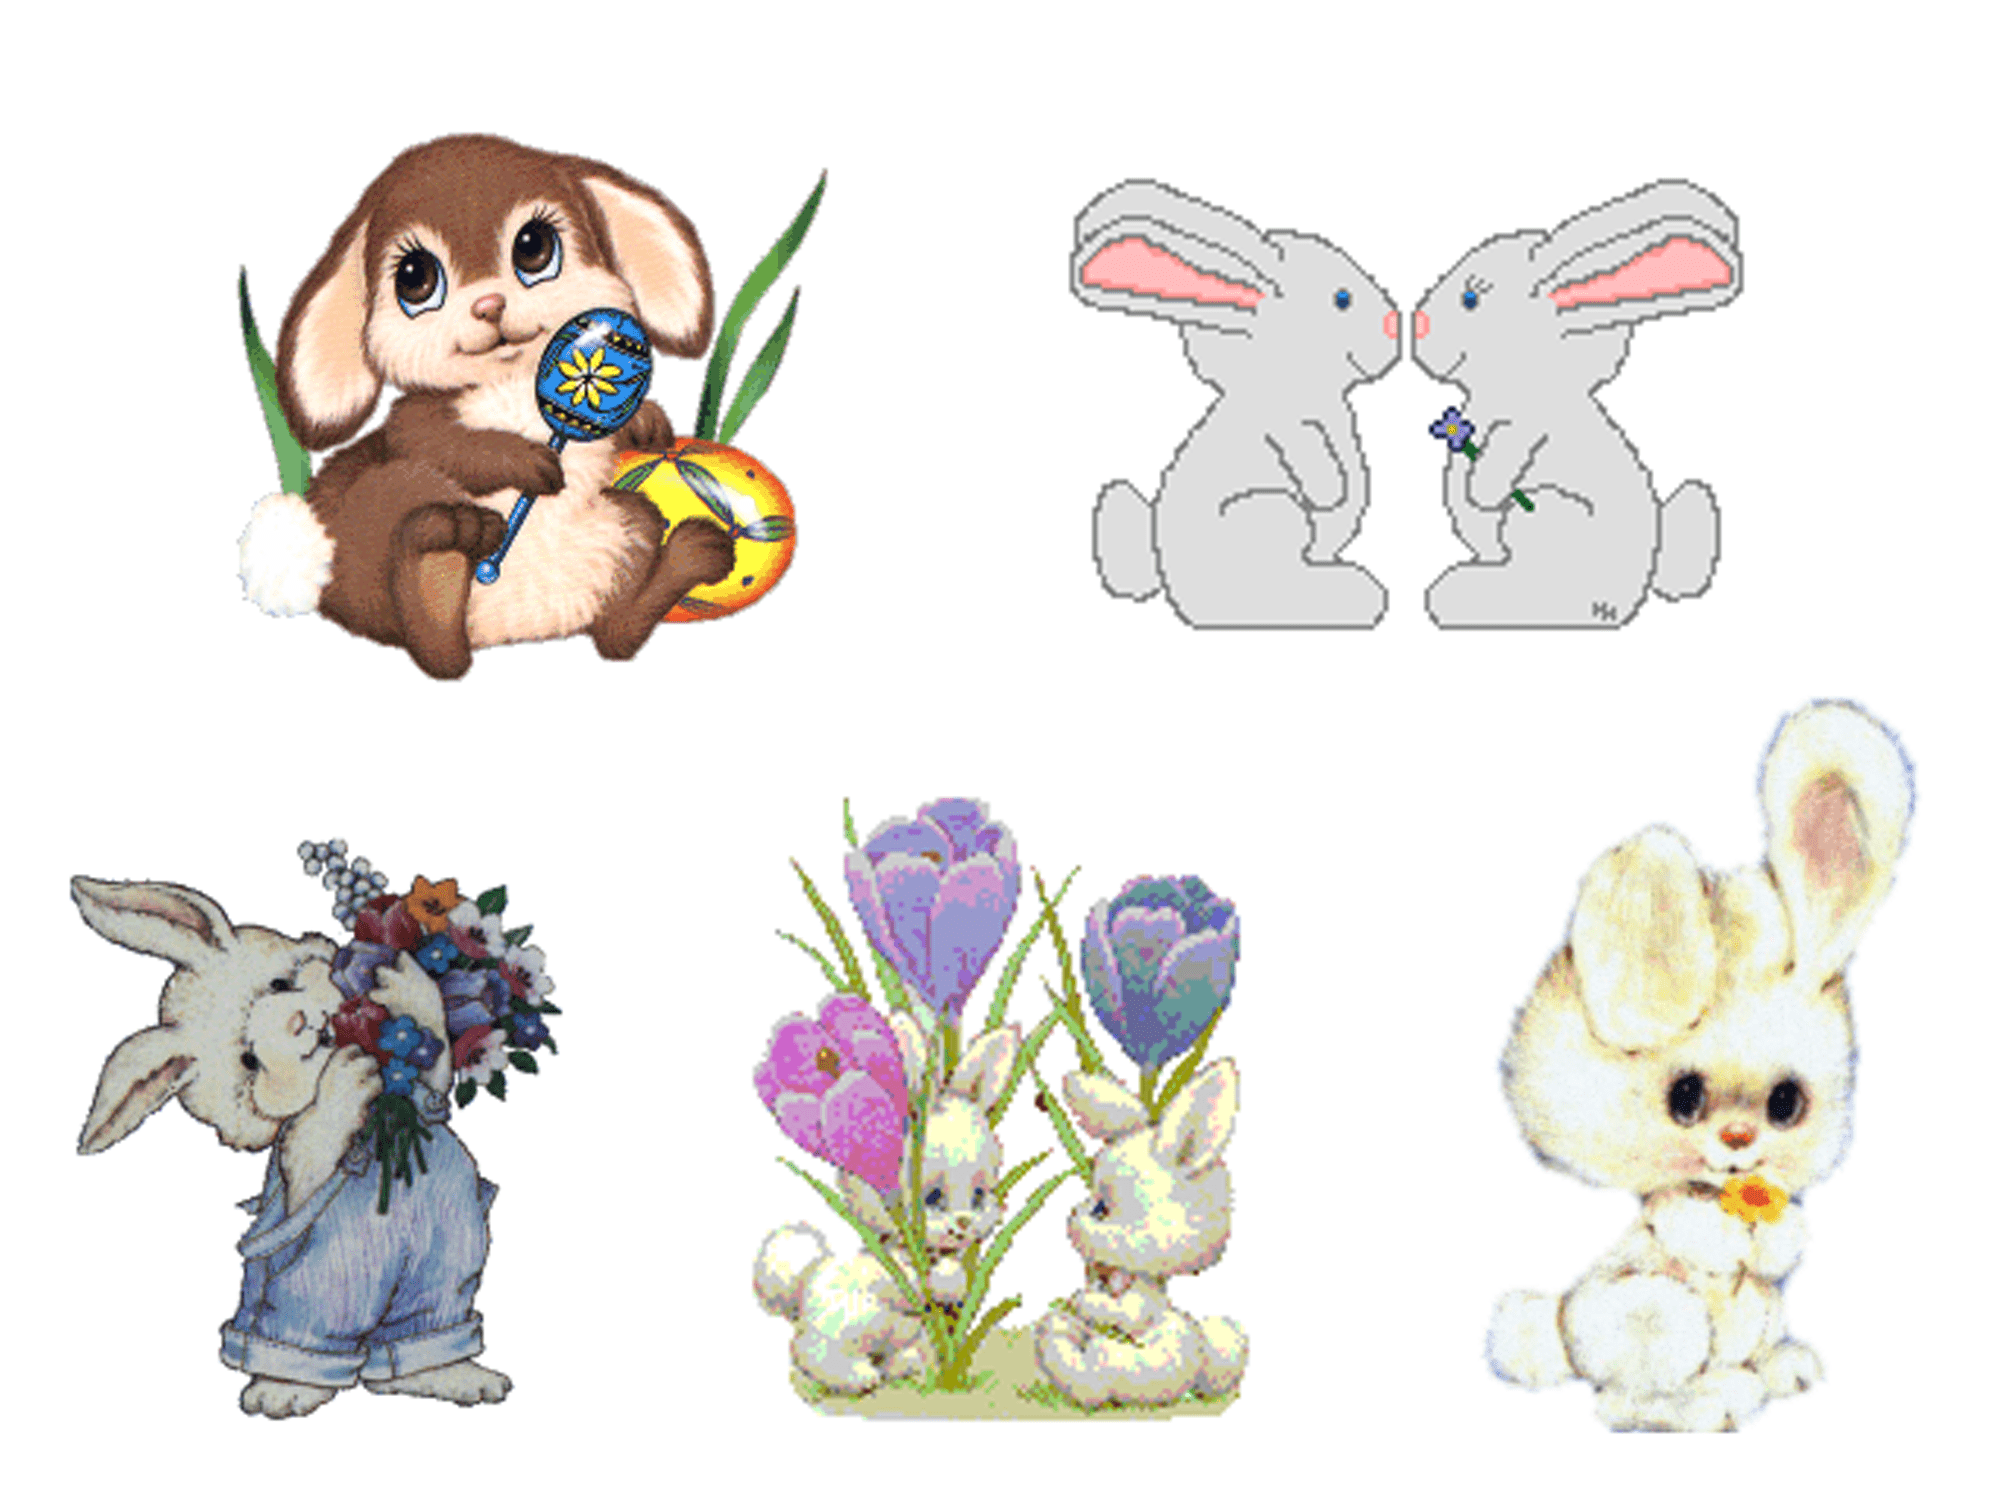 A Huge List of High Quality Free Easter Clip Art